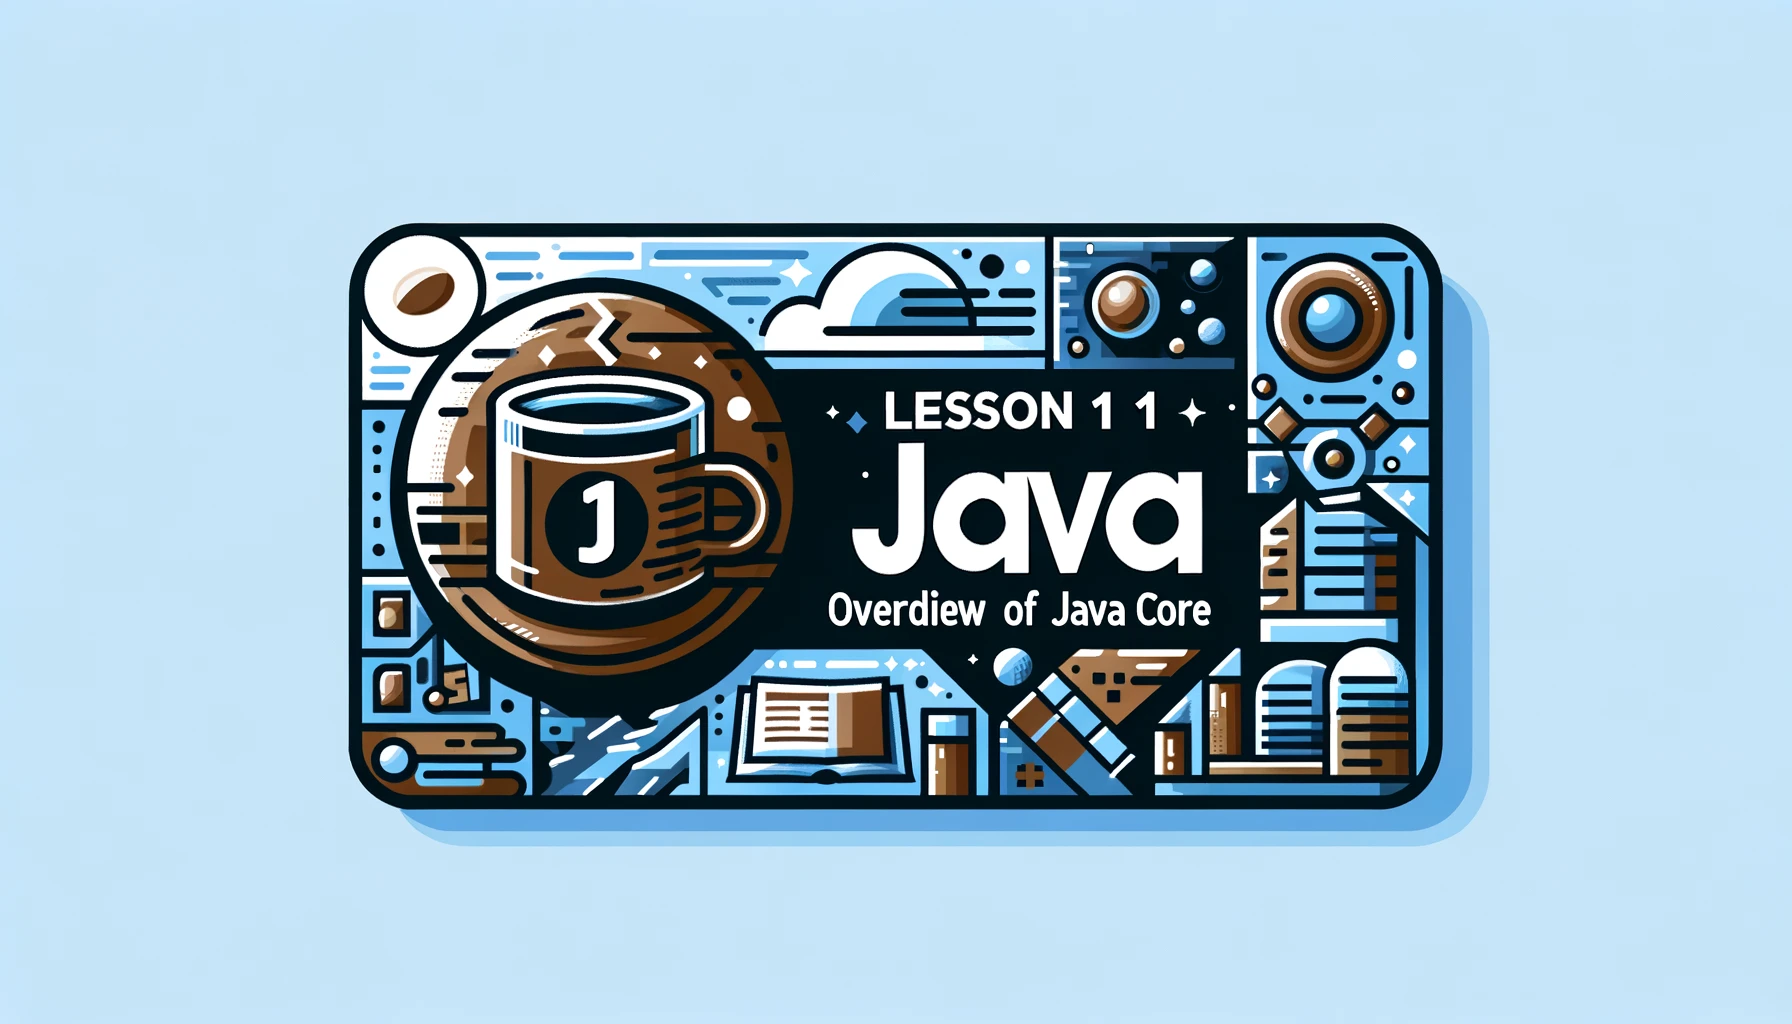 Lesson 1 - Overview of Java Core